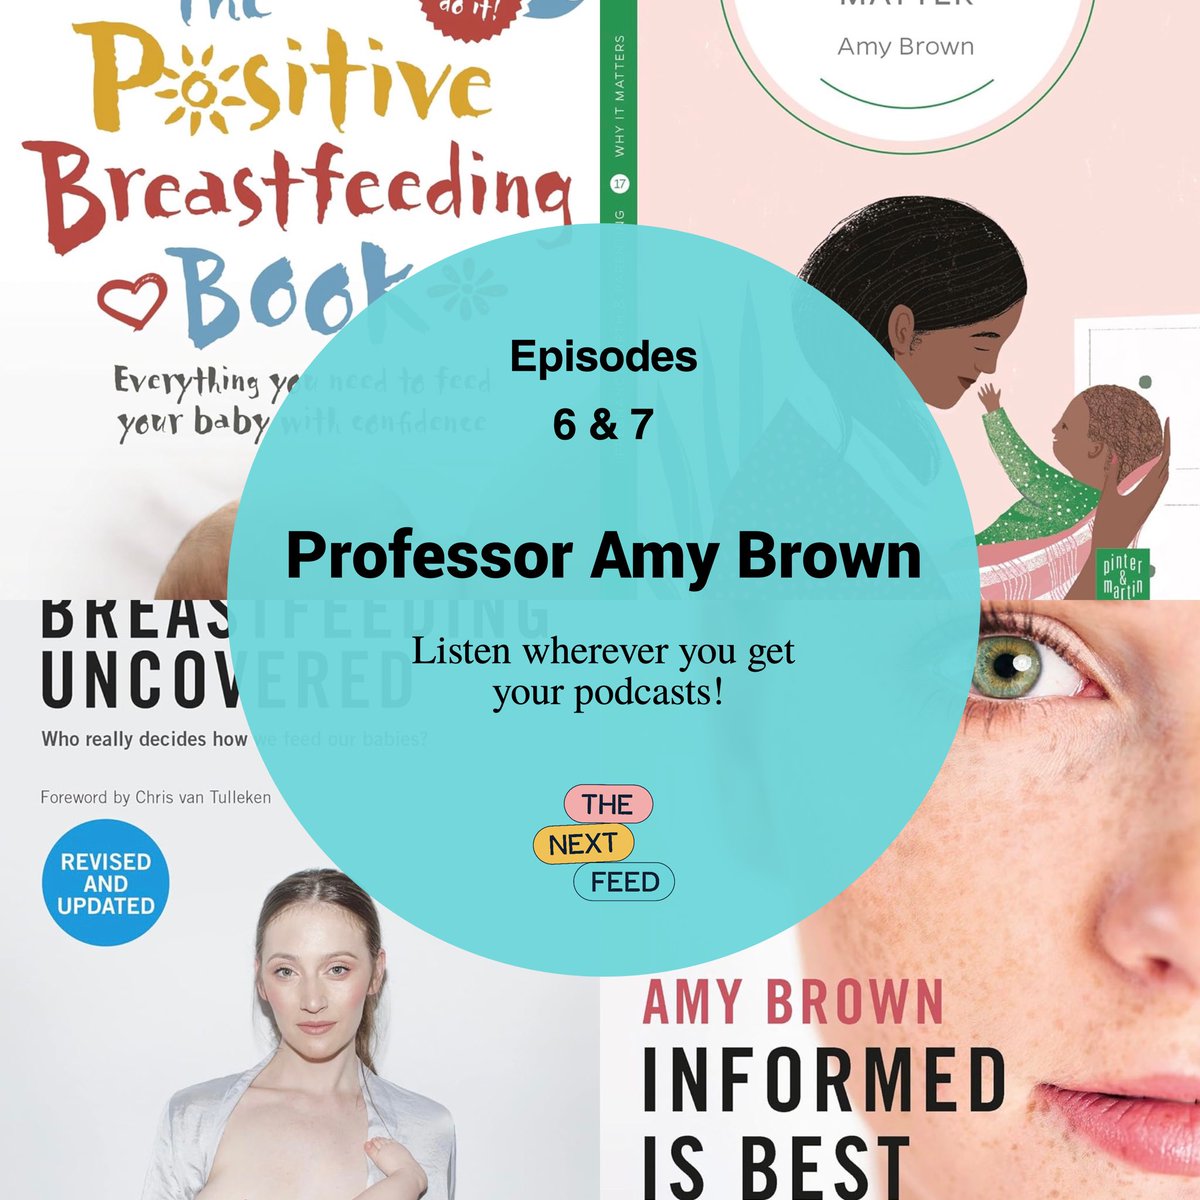 Look who we have on the podcast! Breastfeeding Support…or should be say ‘Professor Amy Brown’ 🤭 Have a listen here to the 2 part interview with @Prof_AmyBrown here: podfollow.com/the-next-feed